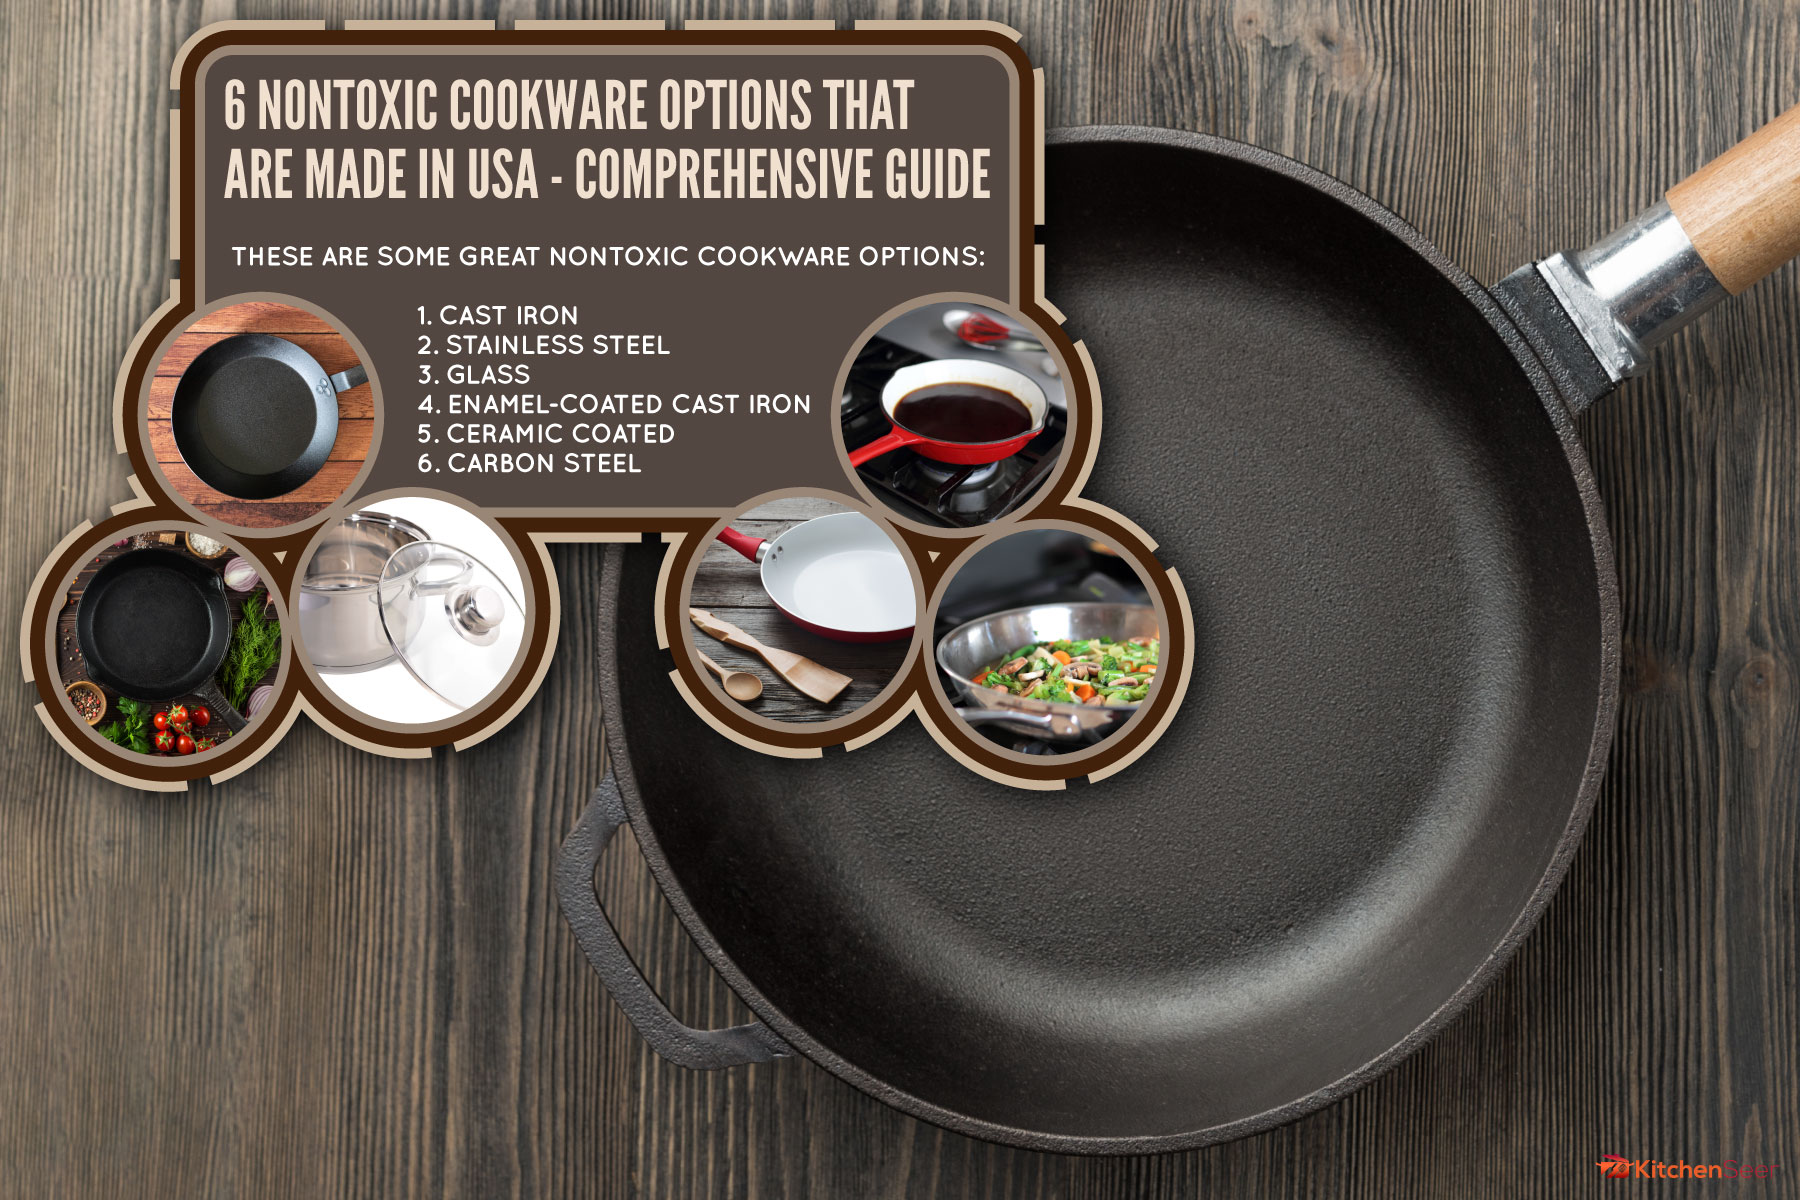 empty-cast-iron-frying-pan-on-wooden-table, X Non Toxic Cookware Options That Are Made In USA - Comprehensive Guide